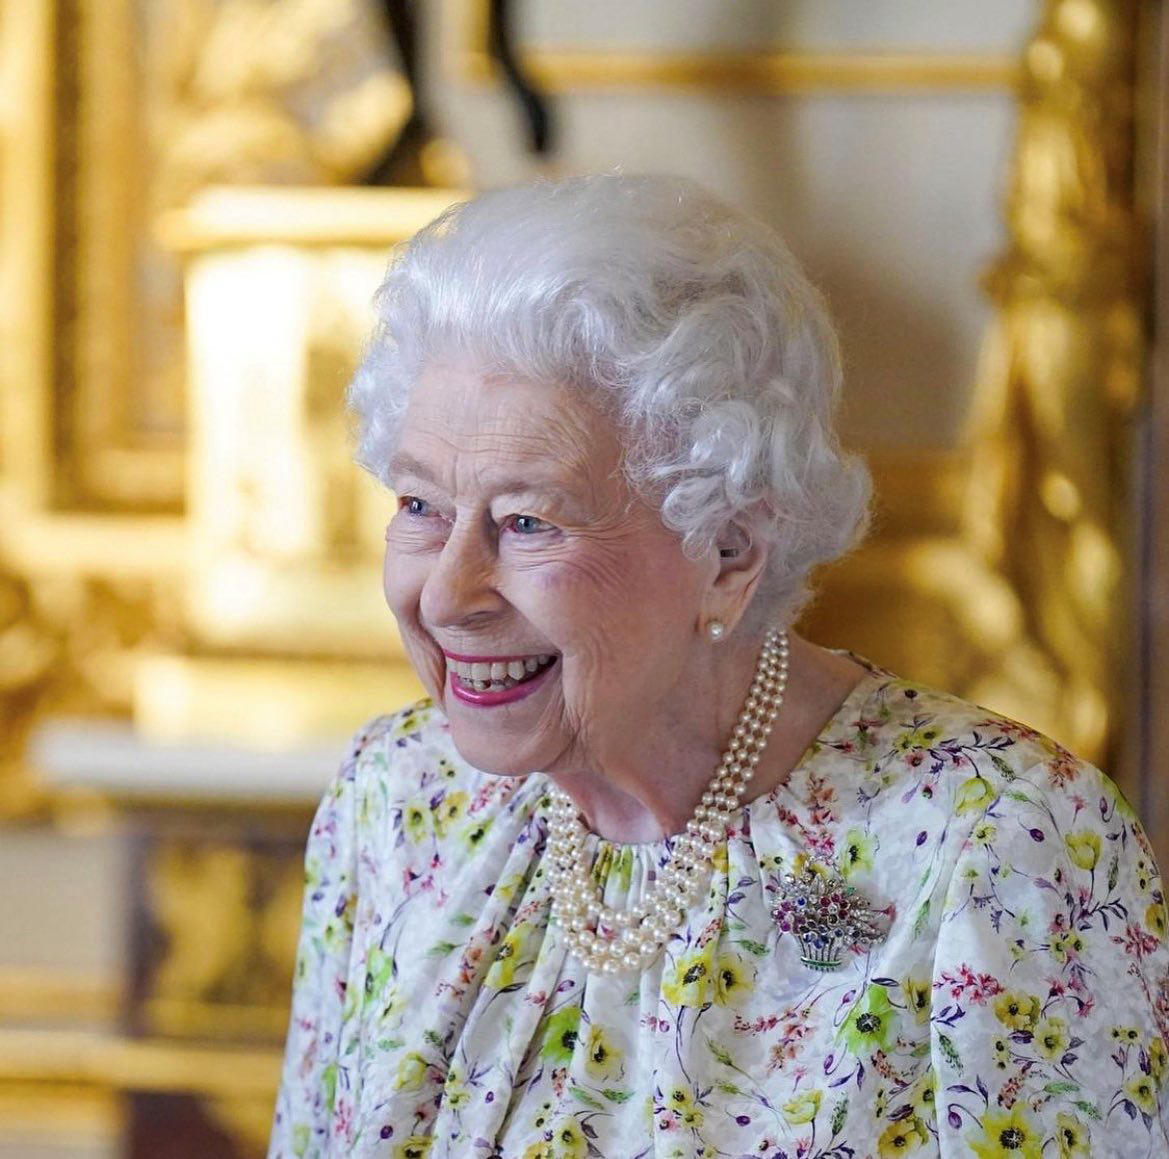 image  1 Royal Lancaster London - Luxury Hotel - We are deeply saddened to hear about the passing of Her Maje